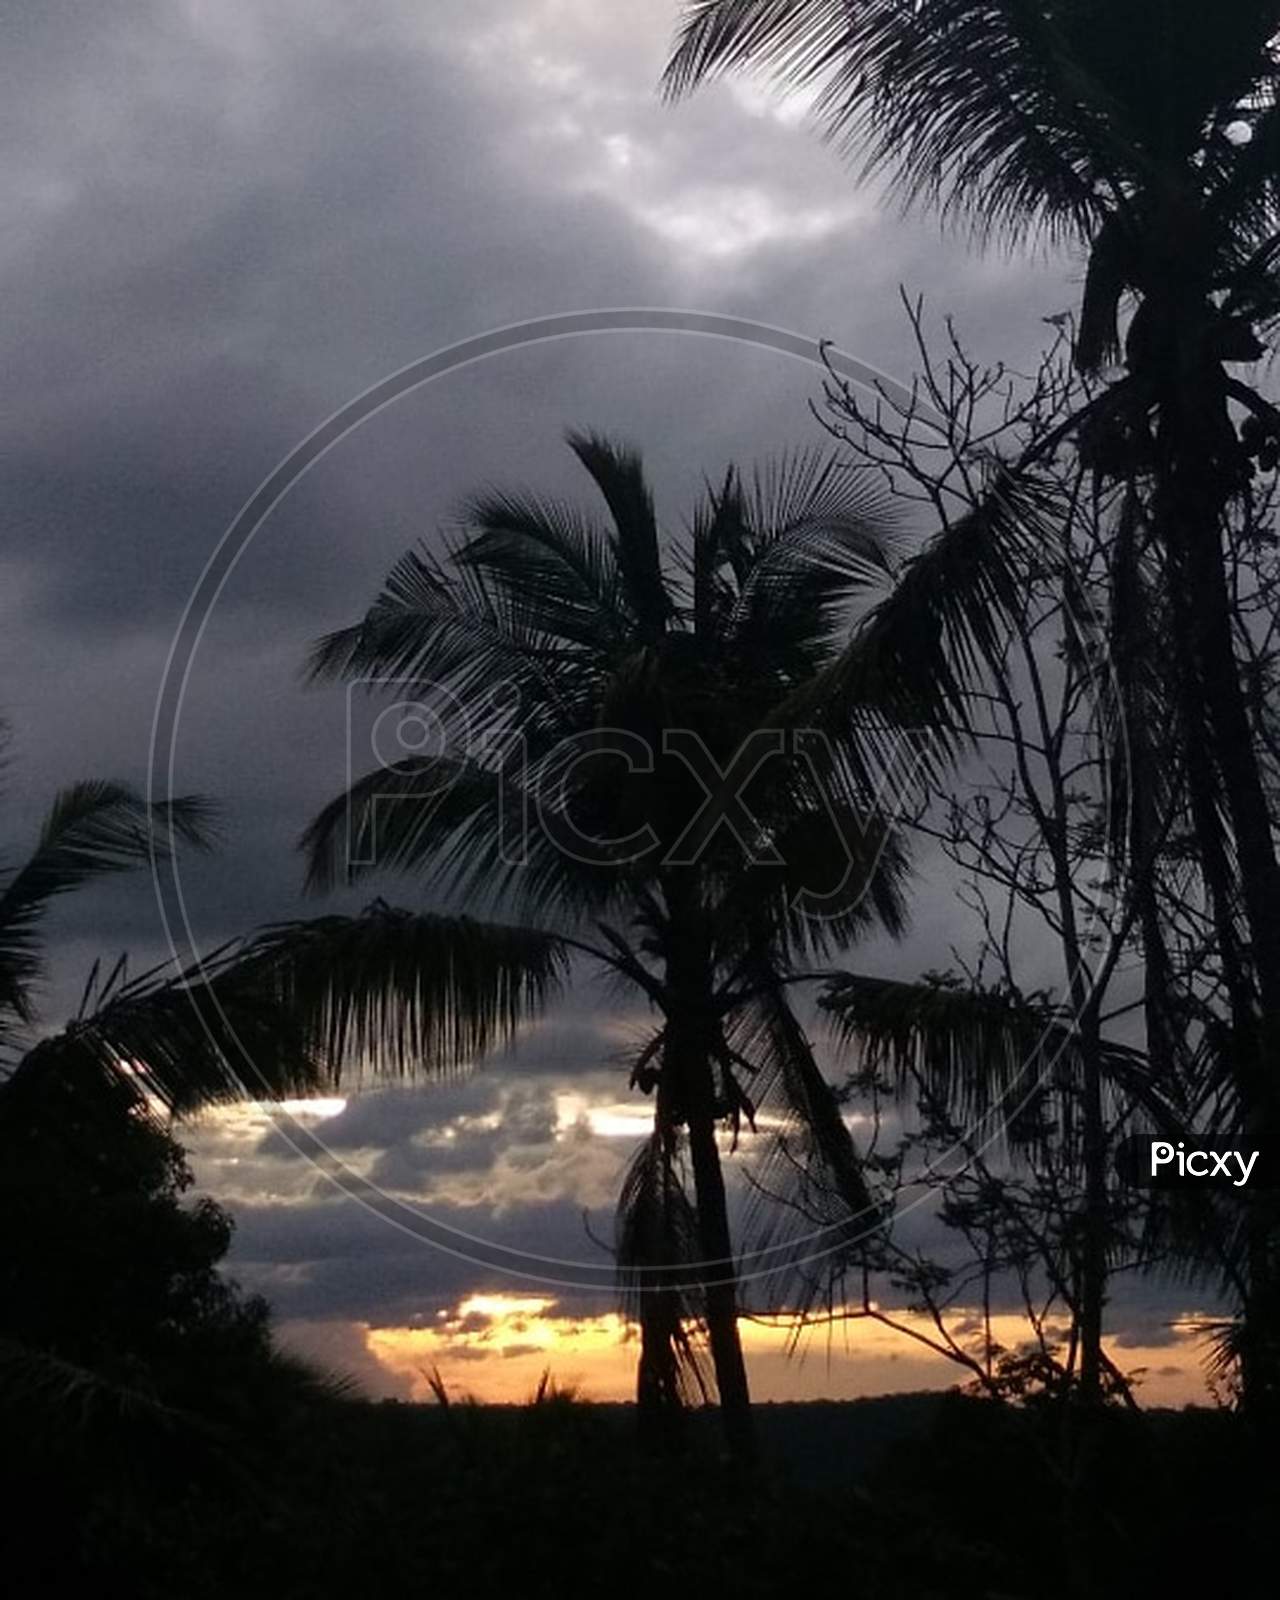 coconut tree in the sunset